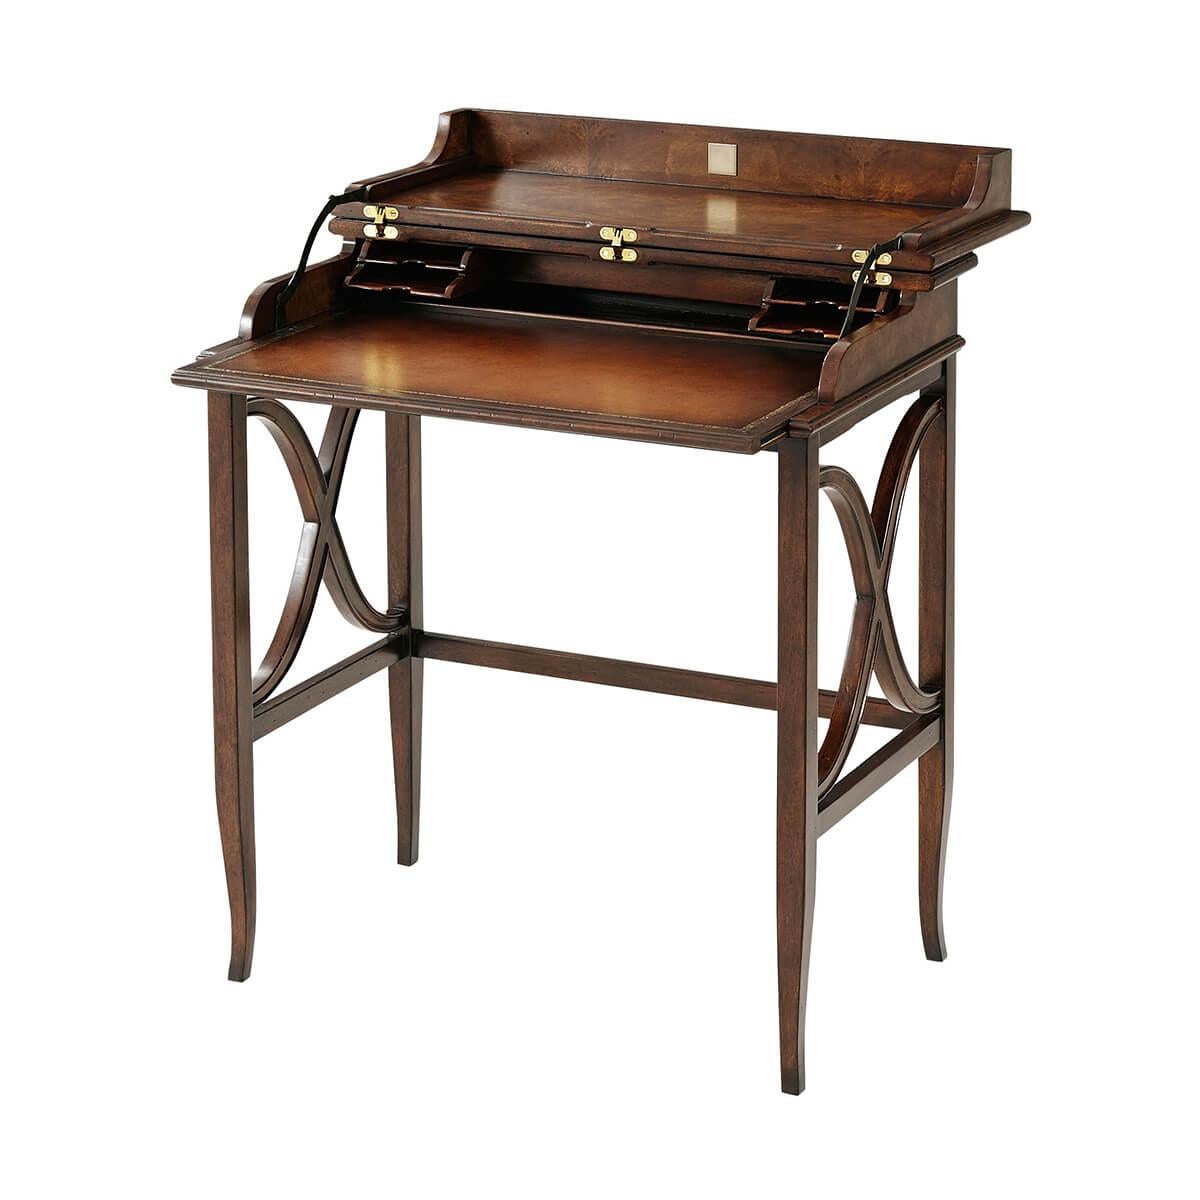 A Campaign style mahogany campaign desk, the circular crossbanded molded edge top hinged and folding open to reveal an interior with pigeon holes and a leather writing surface above square tapering and splayed legs joined by wavy 'X' stretcher to